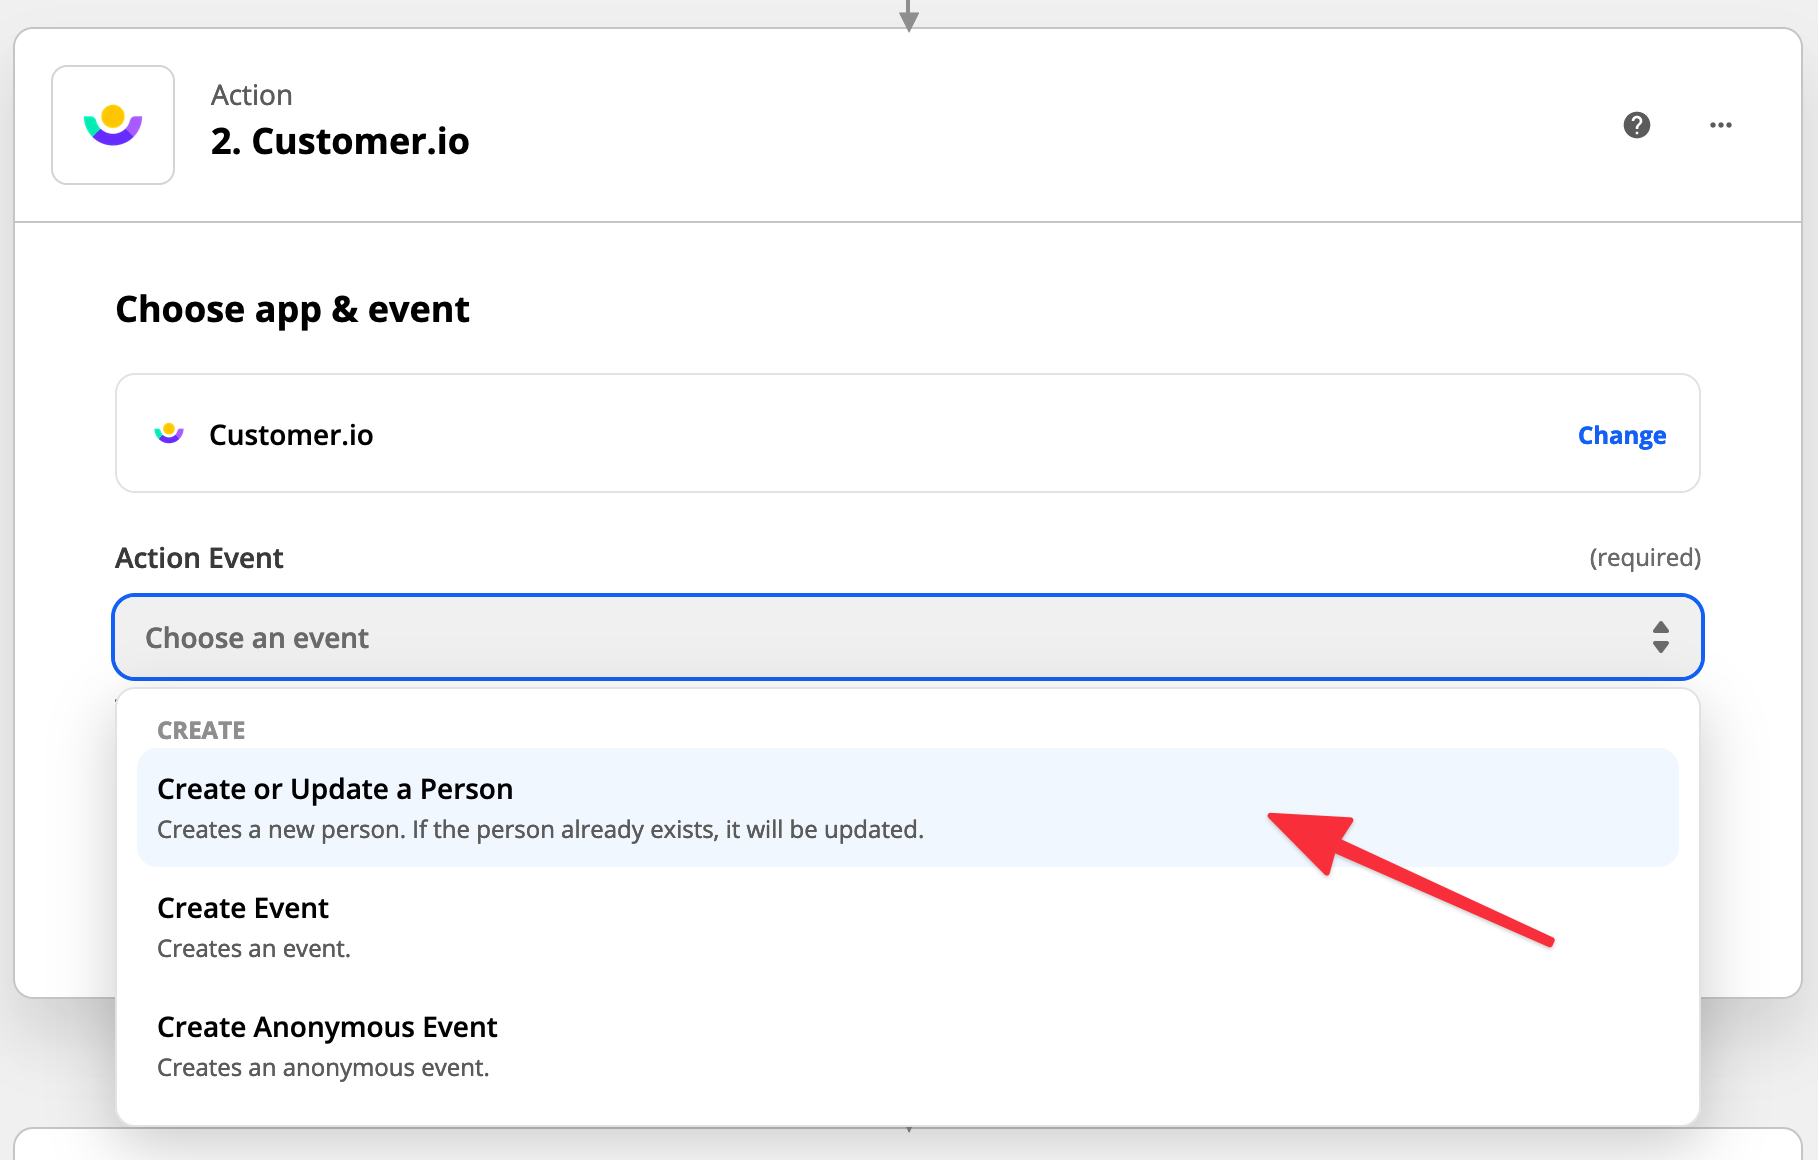 Step 5 of the Zapier integration: Select Create or Update a Person as the Action Event